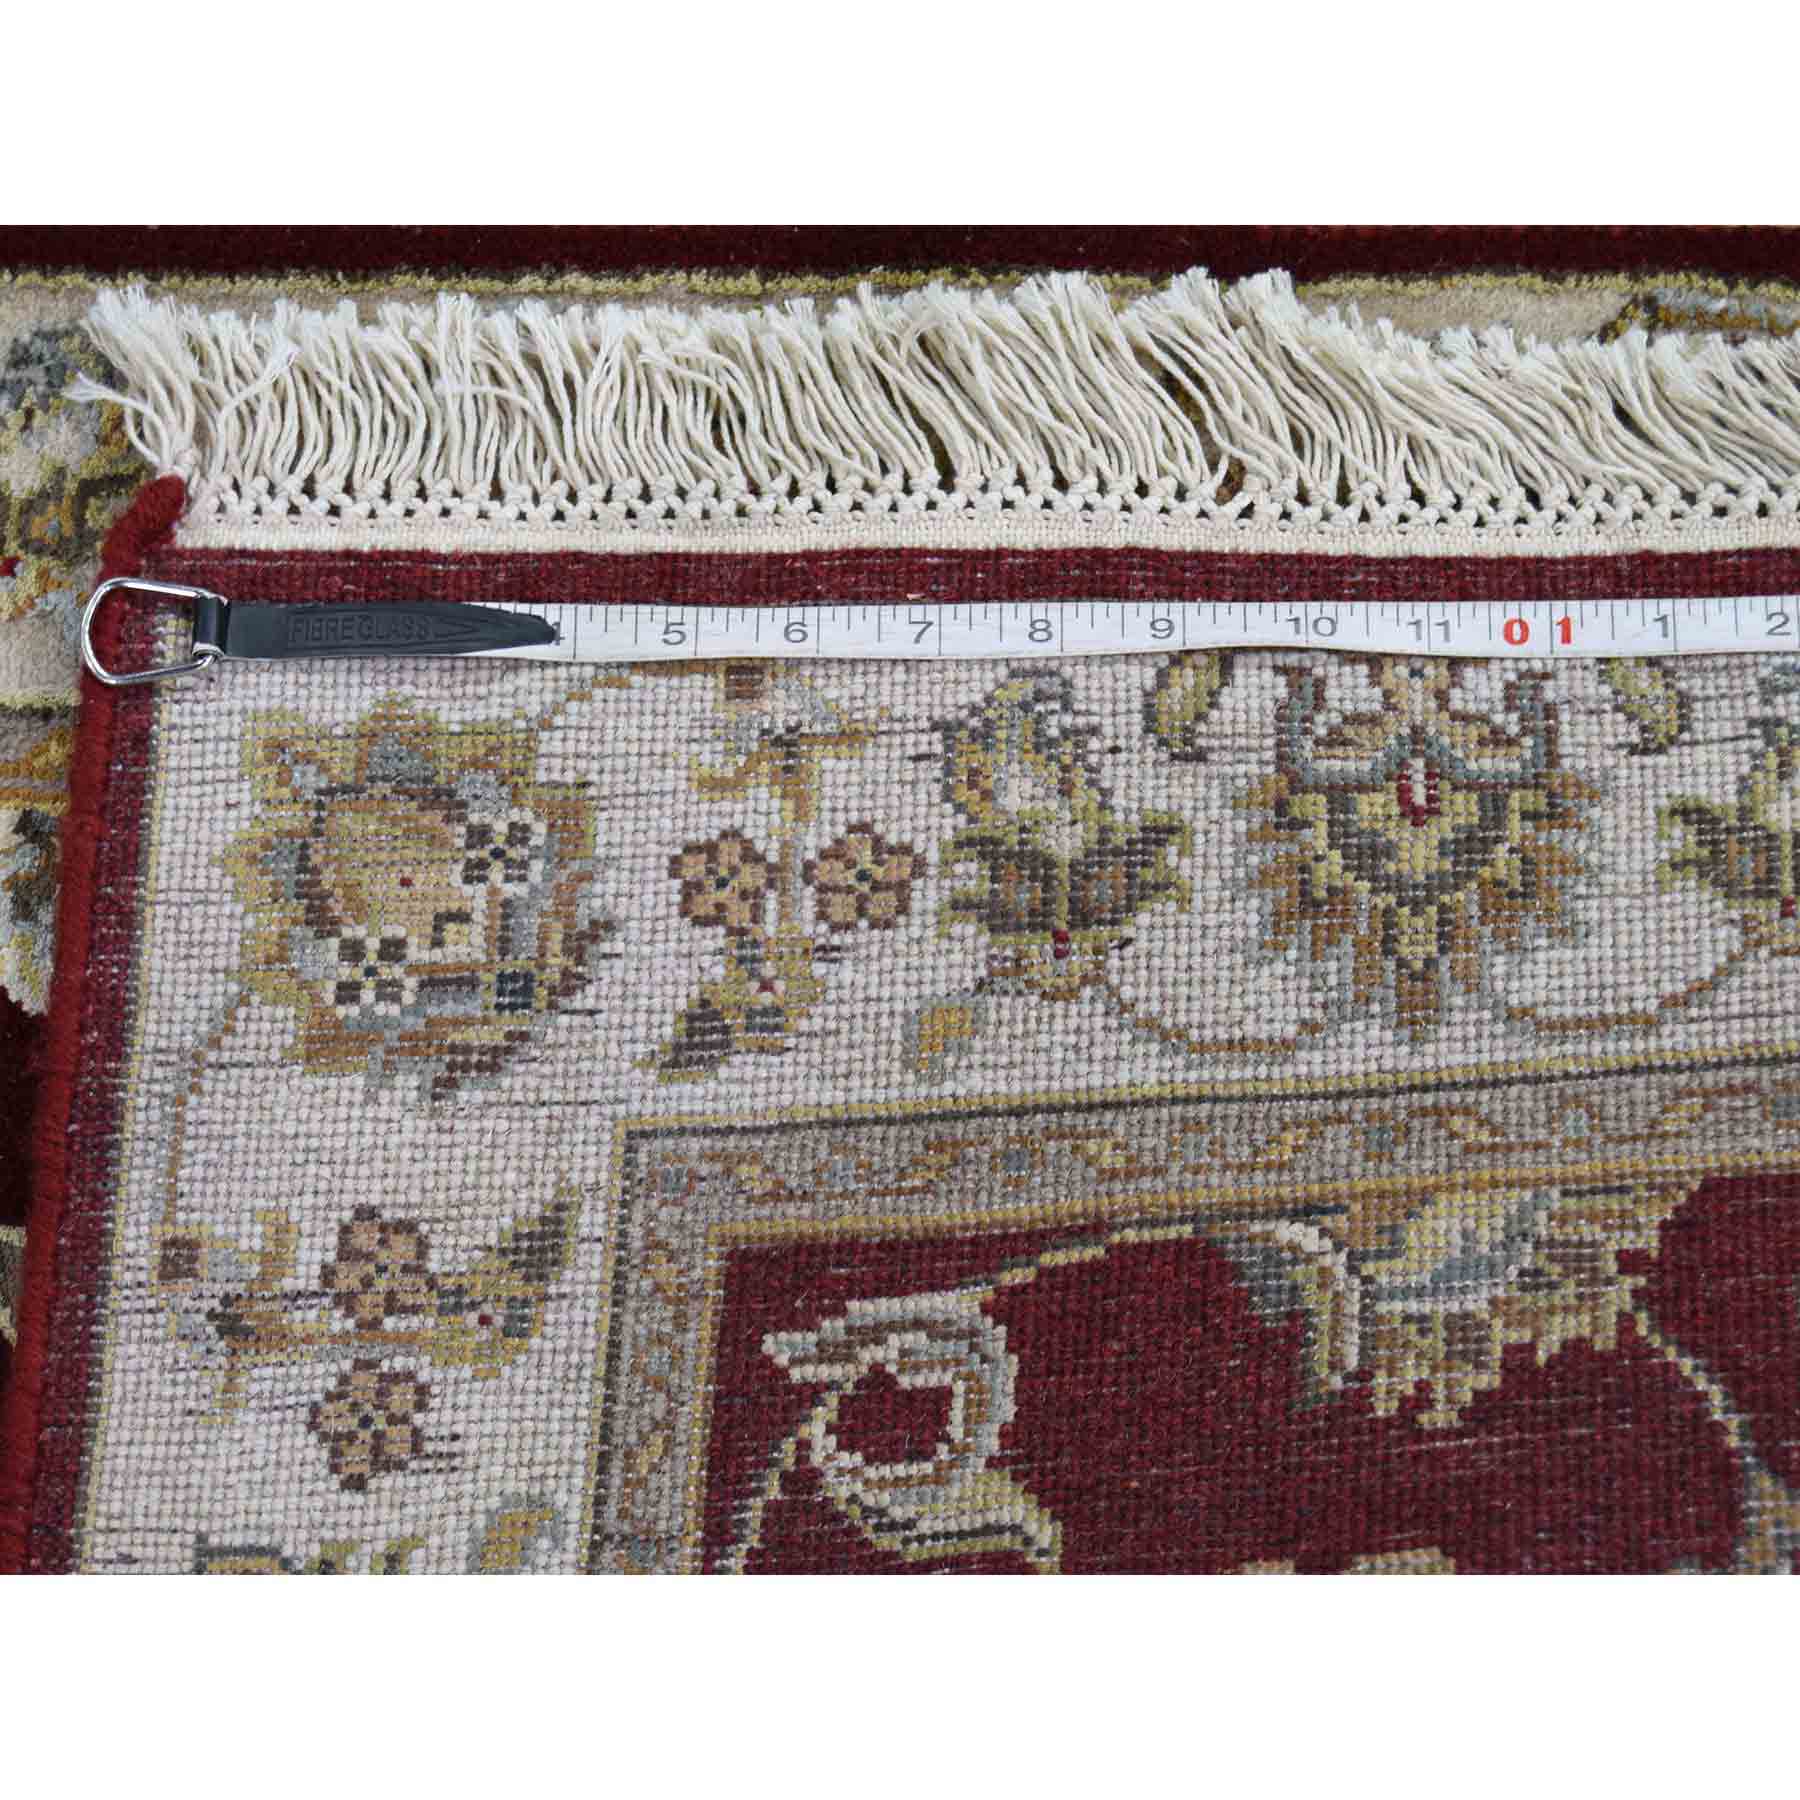 Rajasthan-Hand-Knotted-Rug-213325